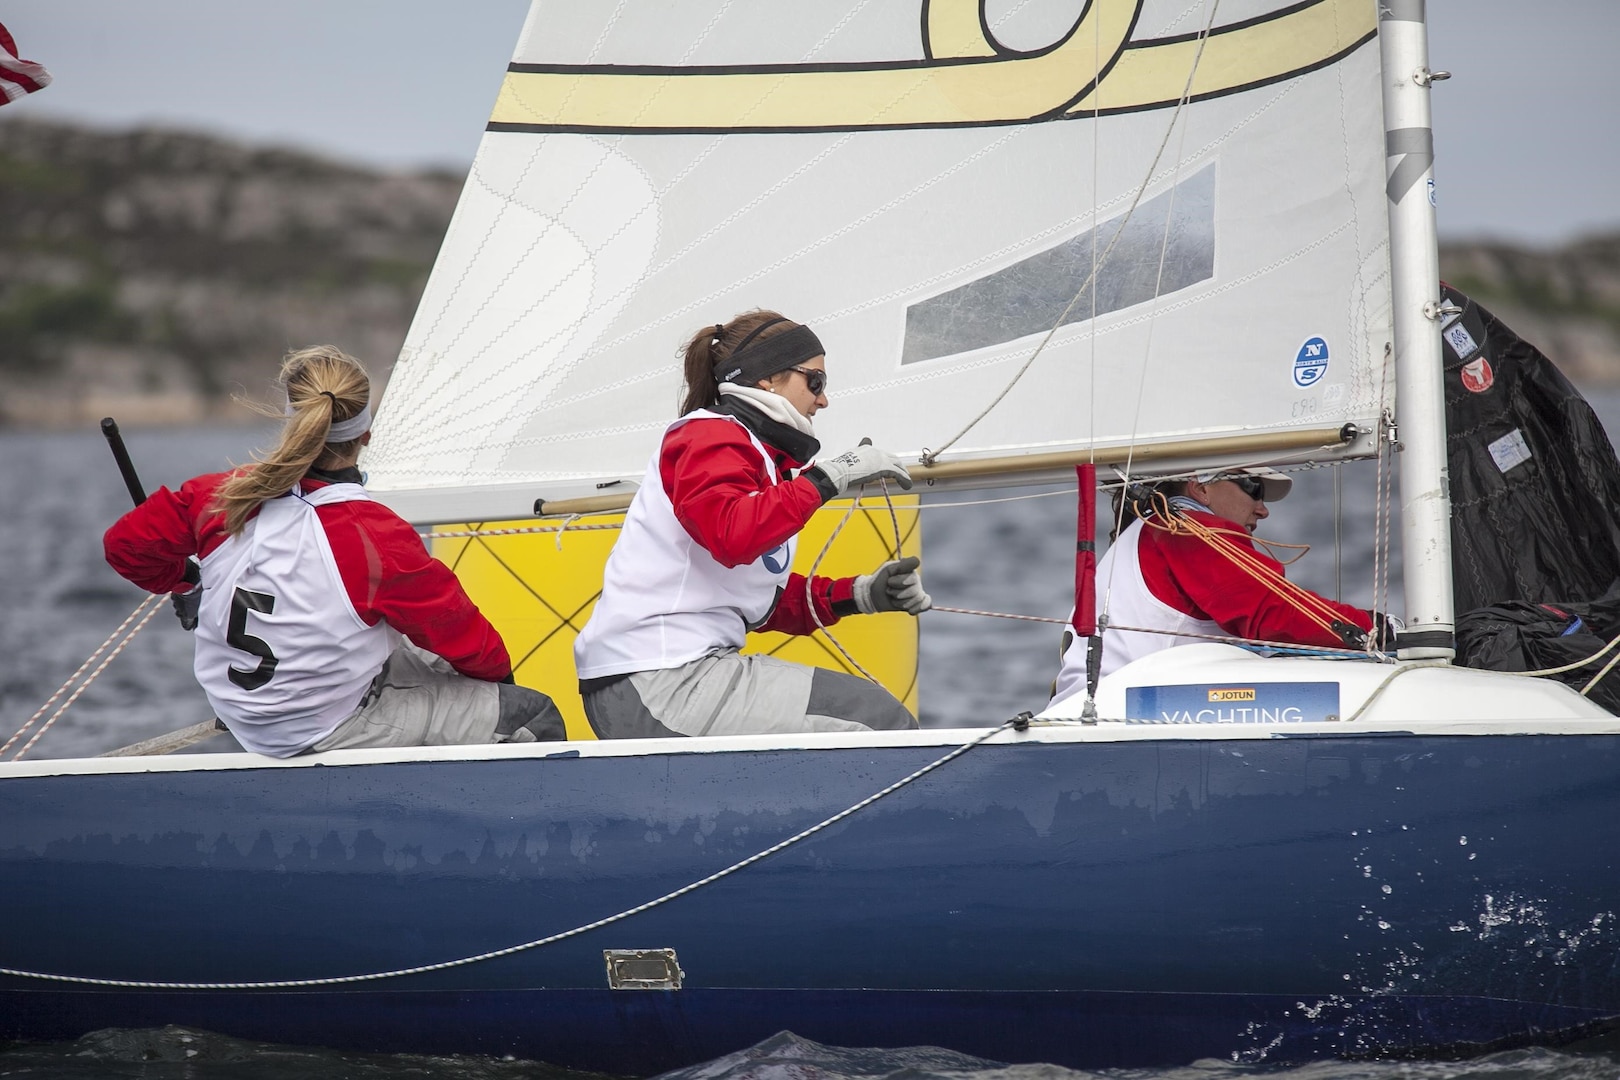 US Women wrap up day three holding steady in third place during the 2013 CISM World Military Sailing Championship at the Askoy Yacht Club in Bergen, Norway.  Left to right is: Skipper, LT Trisha Kutkiewicz (Navy) and crewmembers LTJG Kyrsta Rohde (USCG) and LT Elizabeth Tufts (USCG).